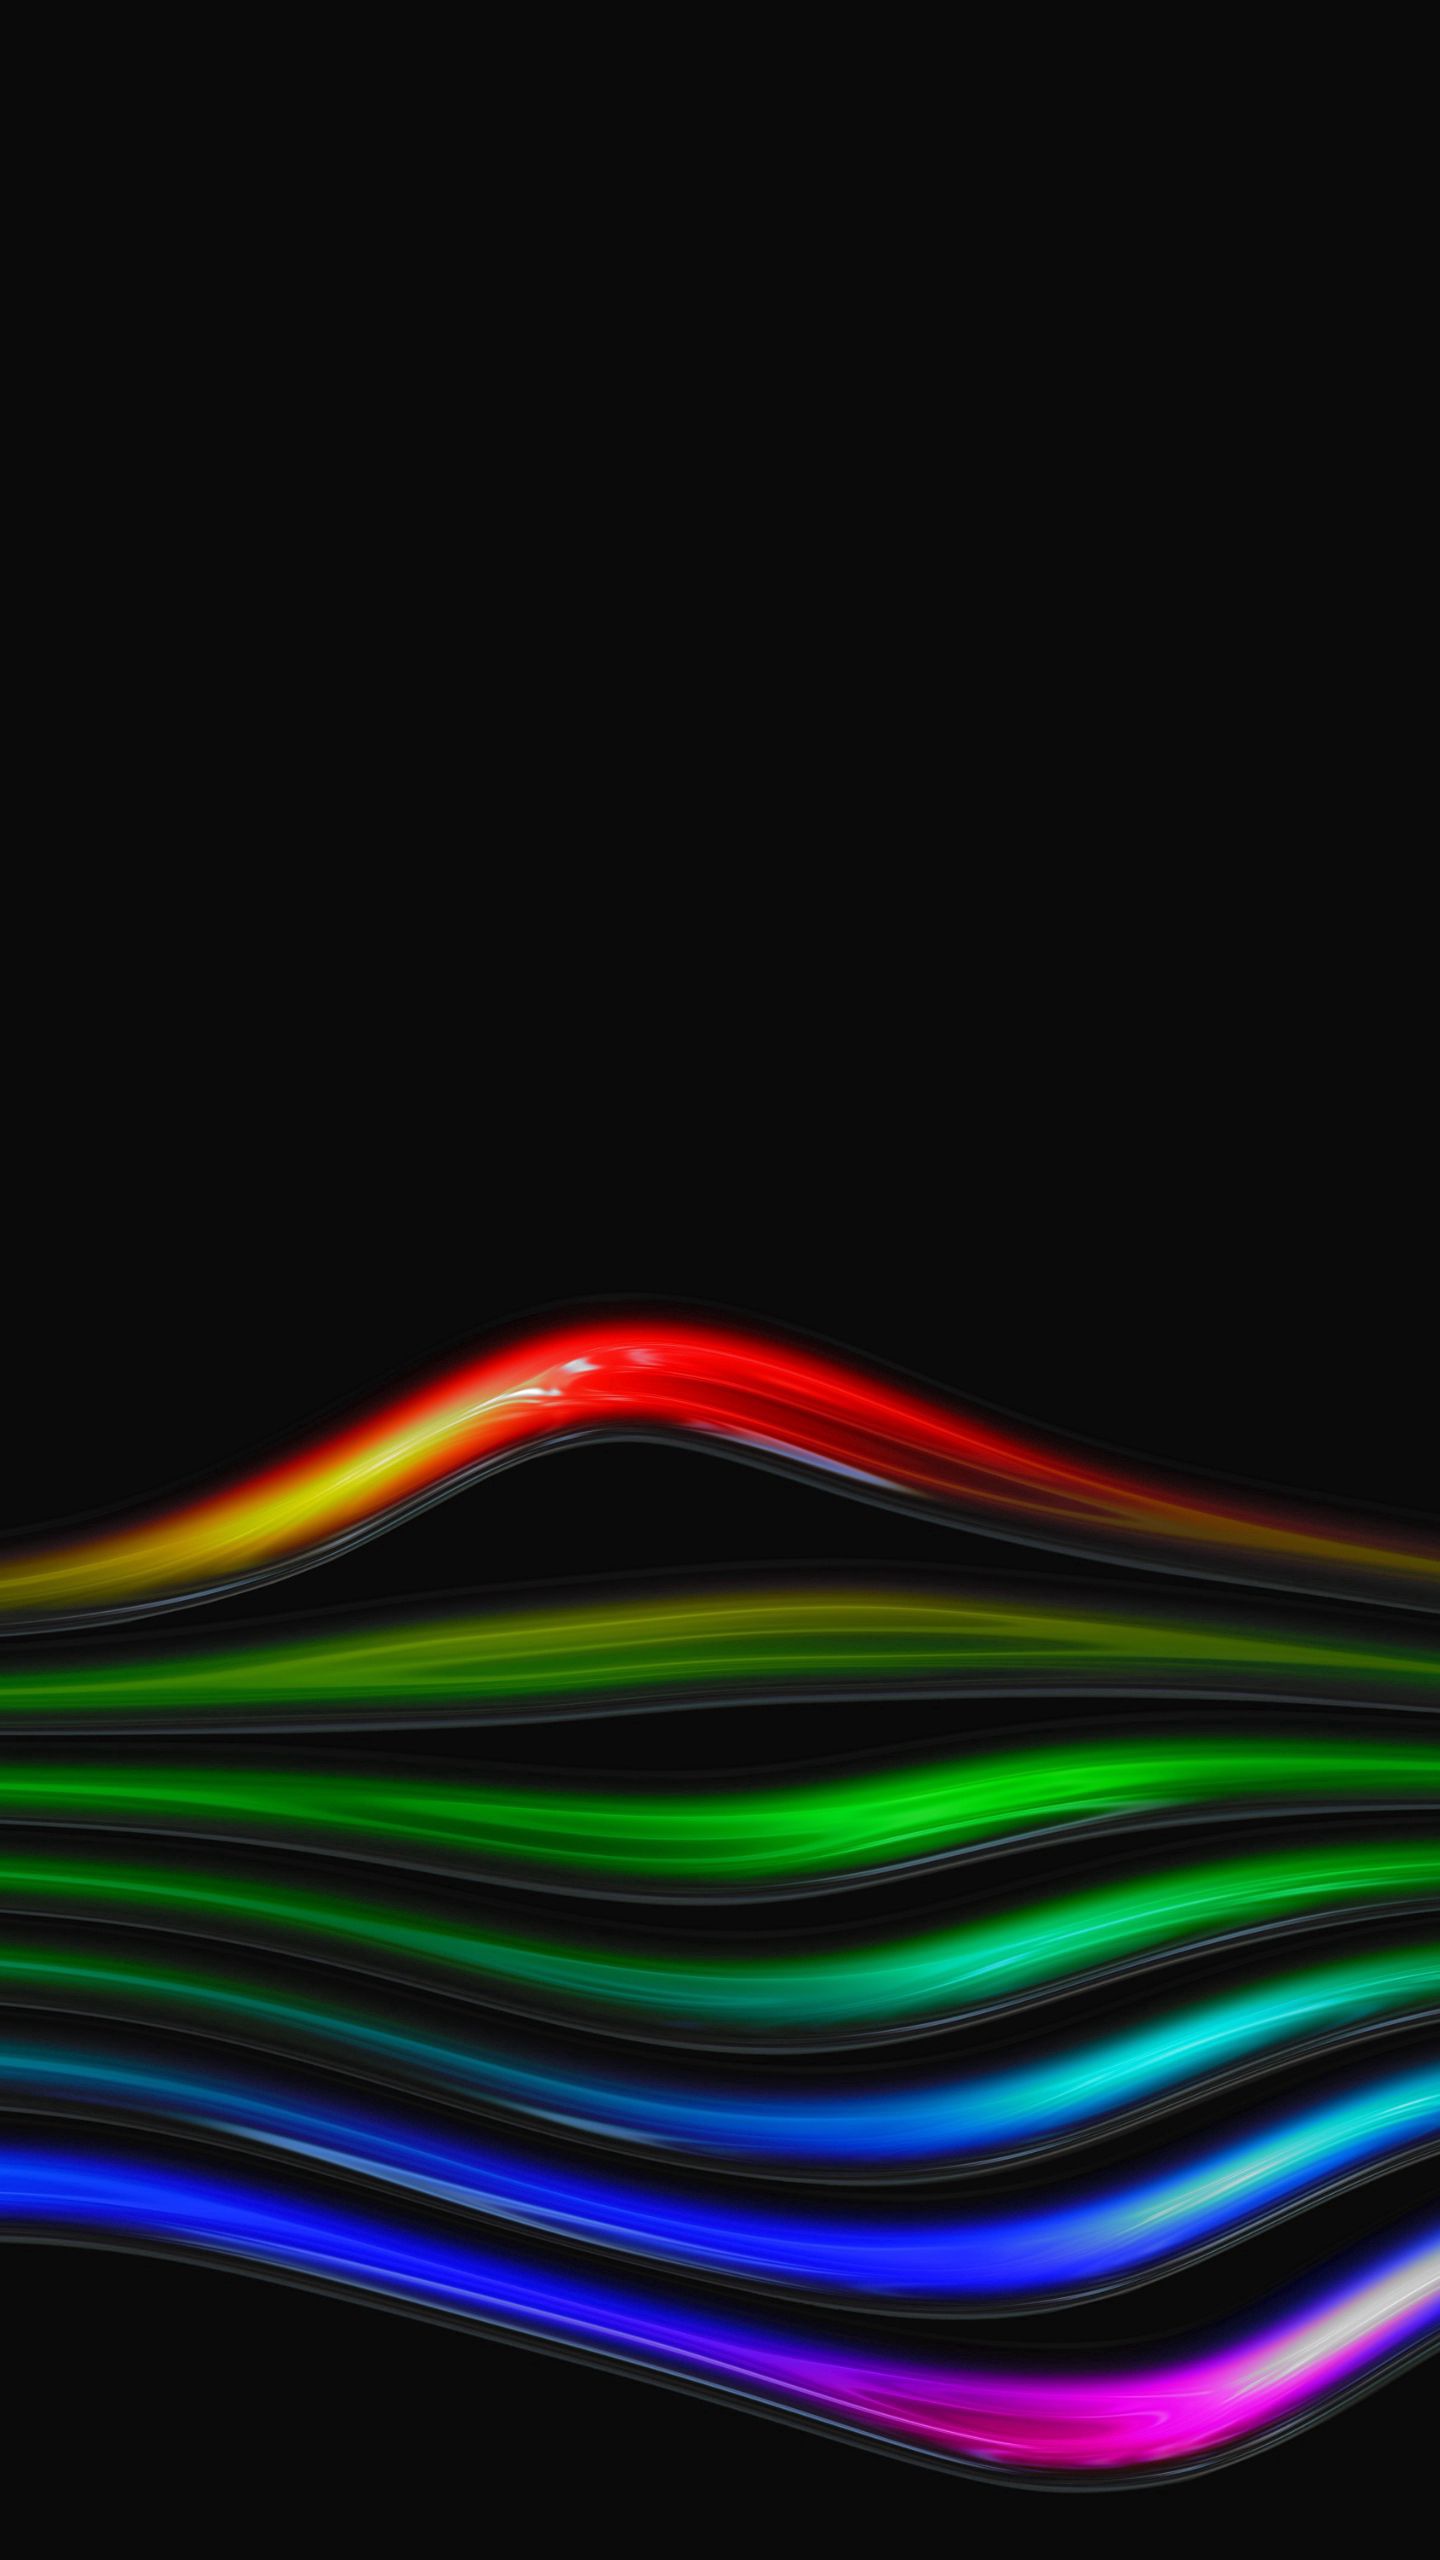 glass, iridescent, abstract, rainbow, bright, lines, tubes, tube, bent, curved Full HD